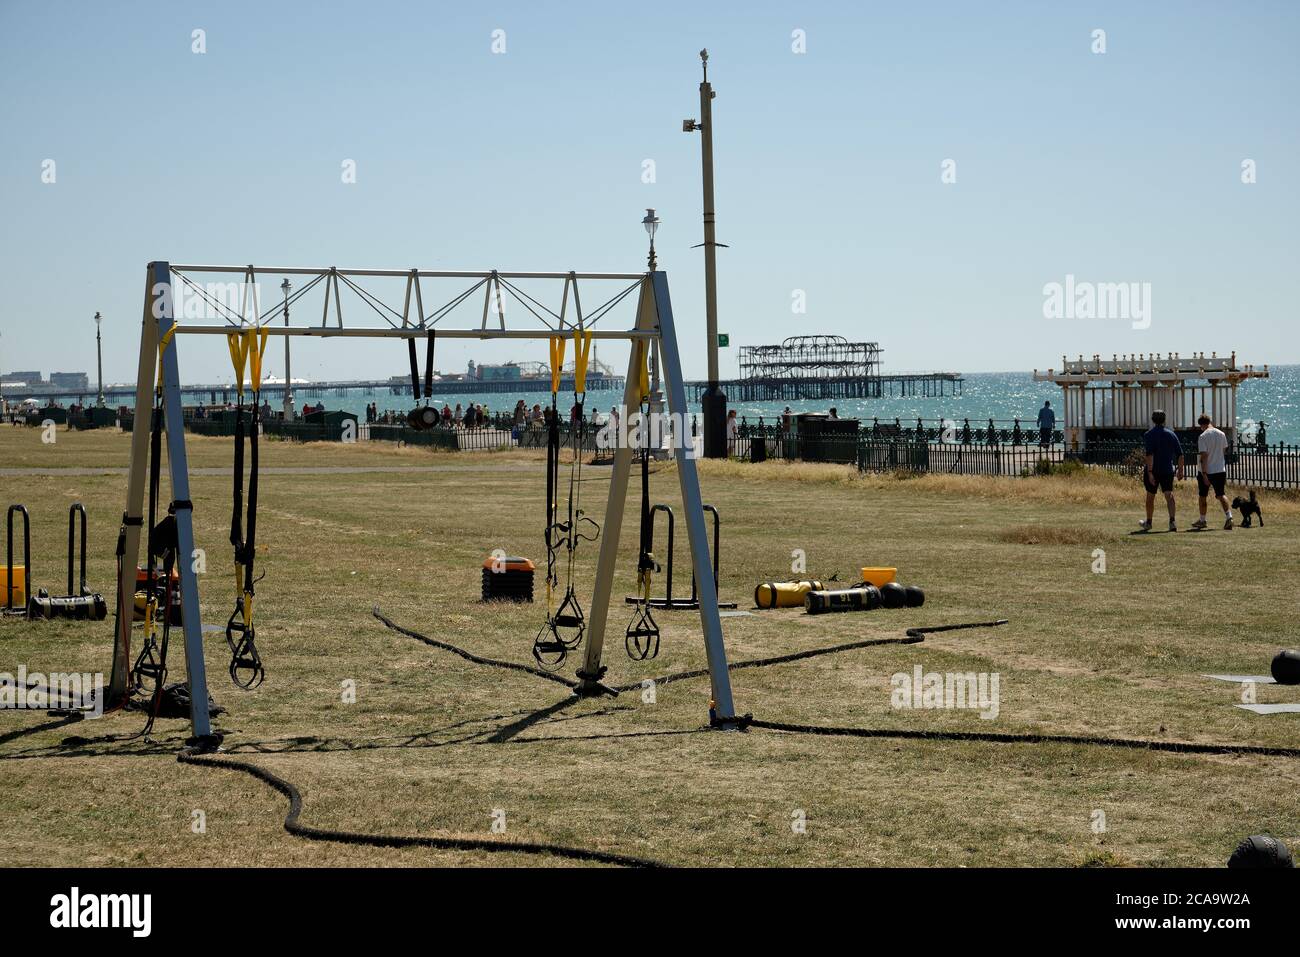 Brighton piers in the background with Hove lawns and exercise/fitness training equipment in the foreground. Stock Photo